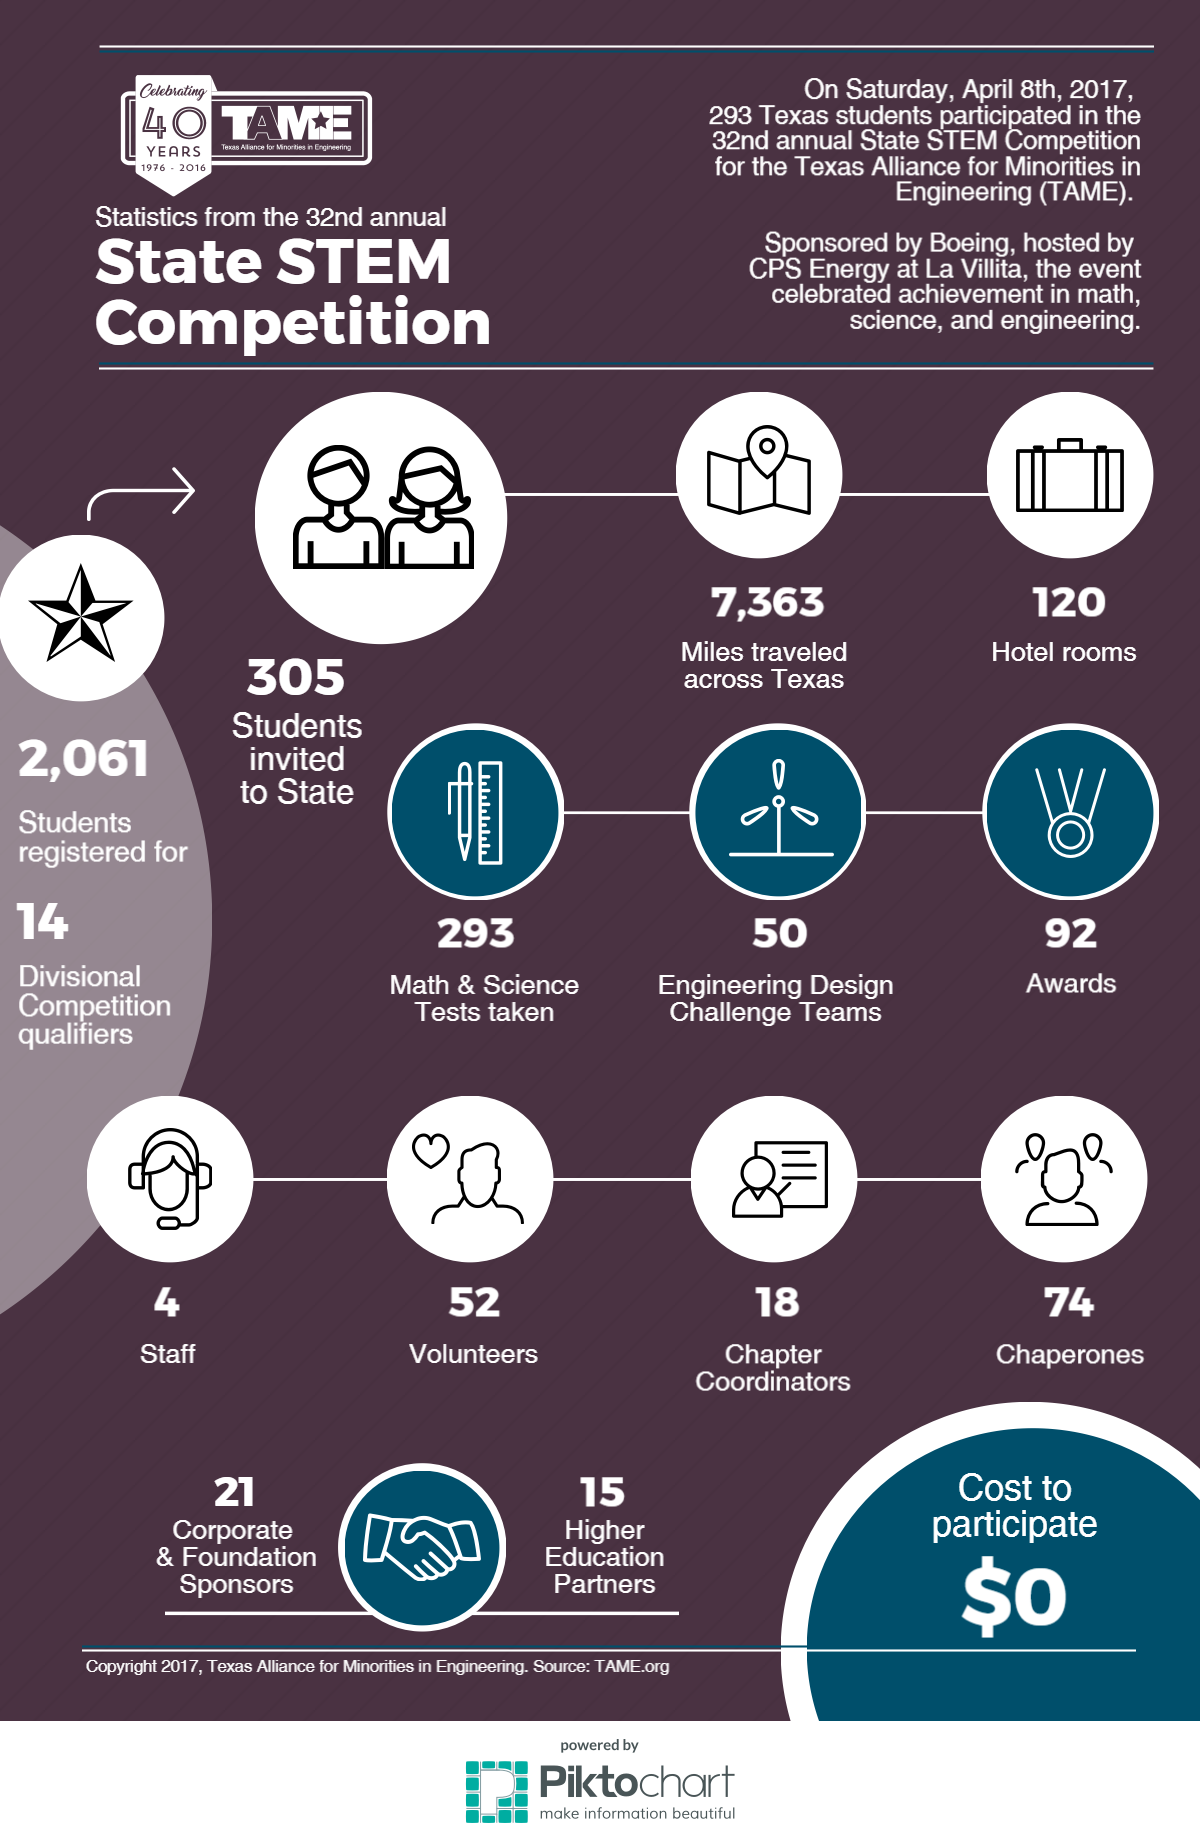 Infographic featuring the 32nd annual State STEM Competition, an annual event organized by the Texas Alliance for Minorities in Engineering (TAME). This year’s competition, sponsored by Boeing and hosted by CPS Energy, brought 293 Texas students, grades 6 – 12, to San Antonio to test their skills in math, science, and engineering in both individual and collaborative challenges.